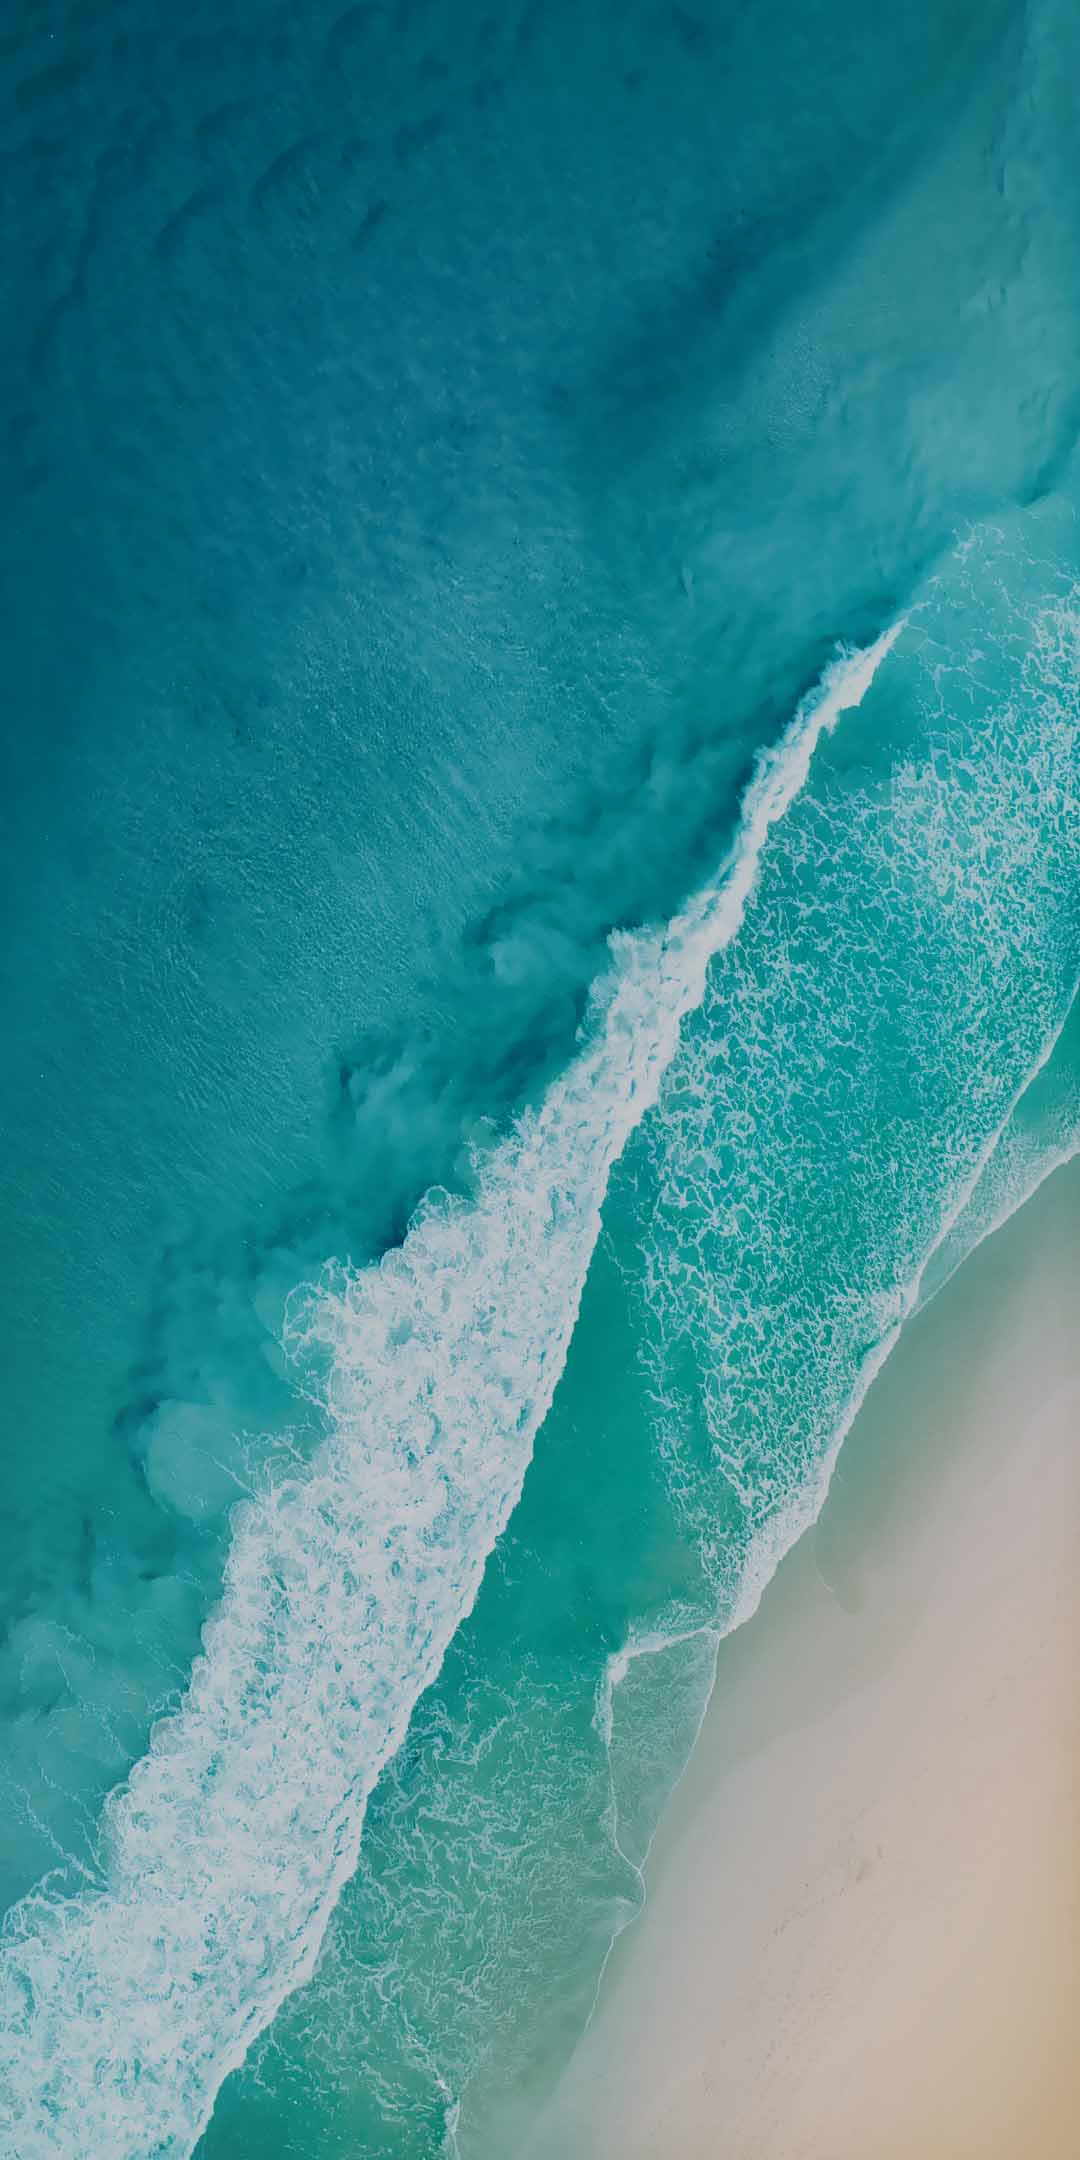 wallpaper picture download,aqua,water,blue,turquoise,wave